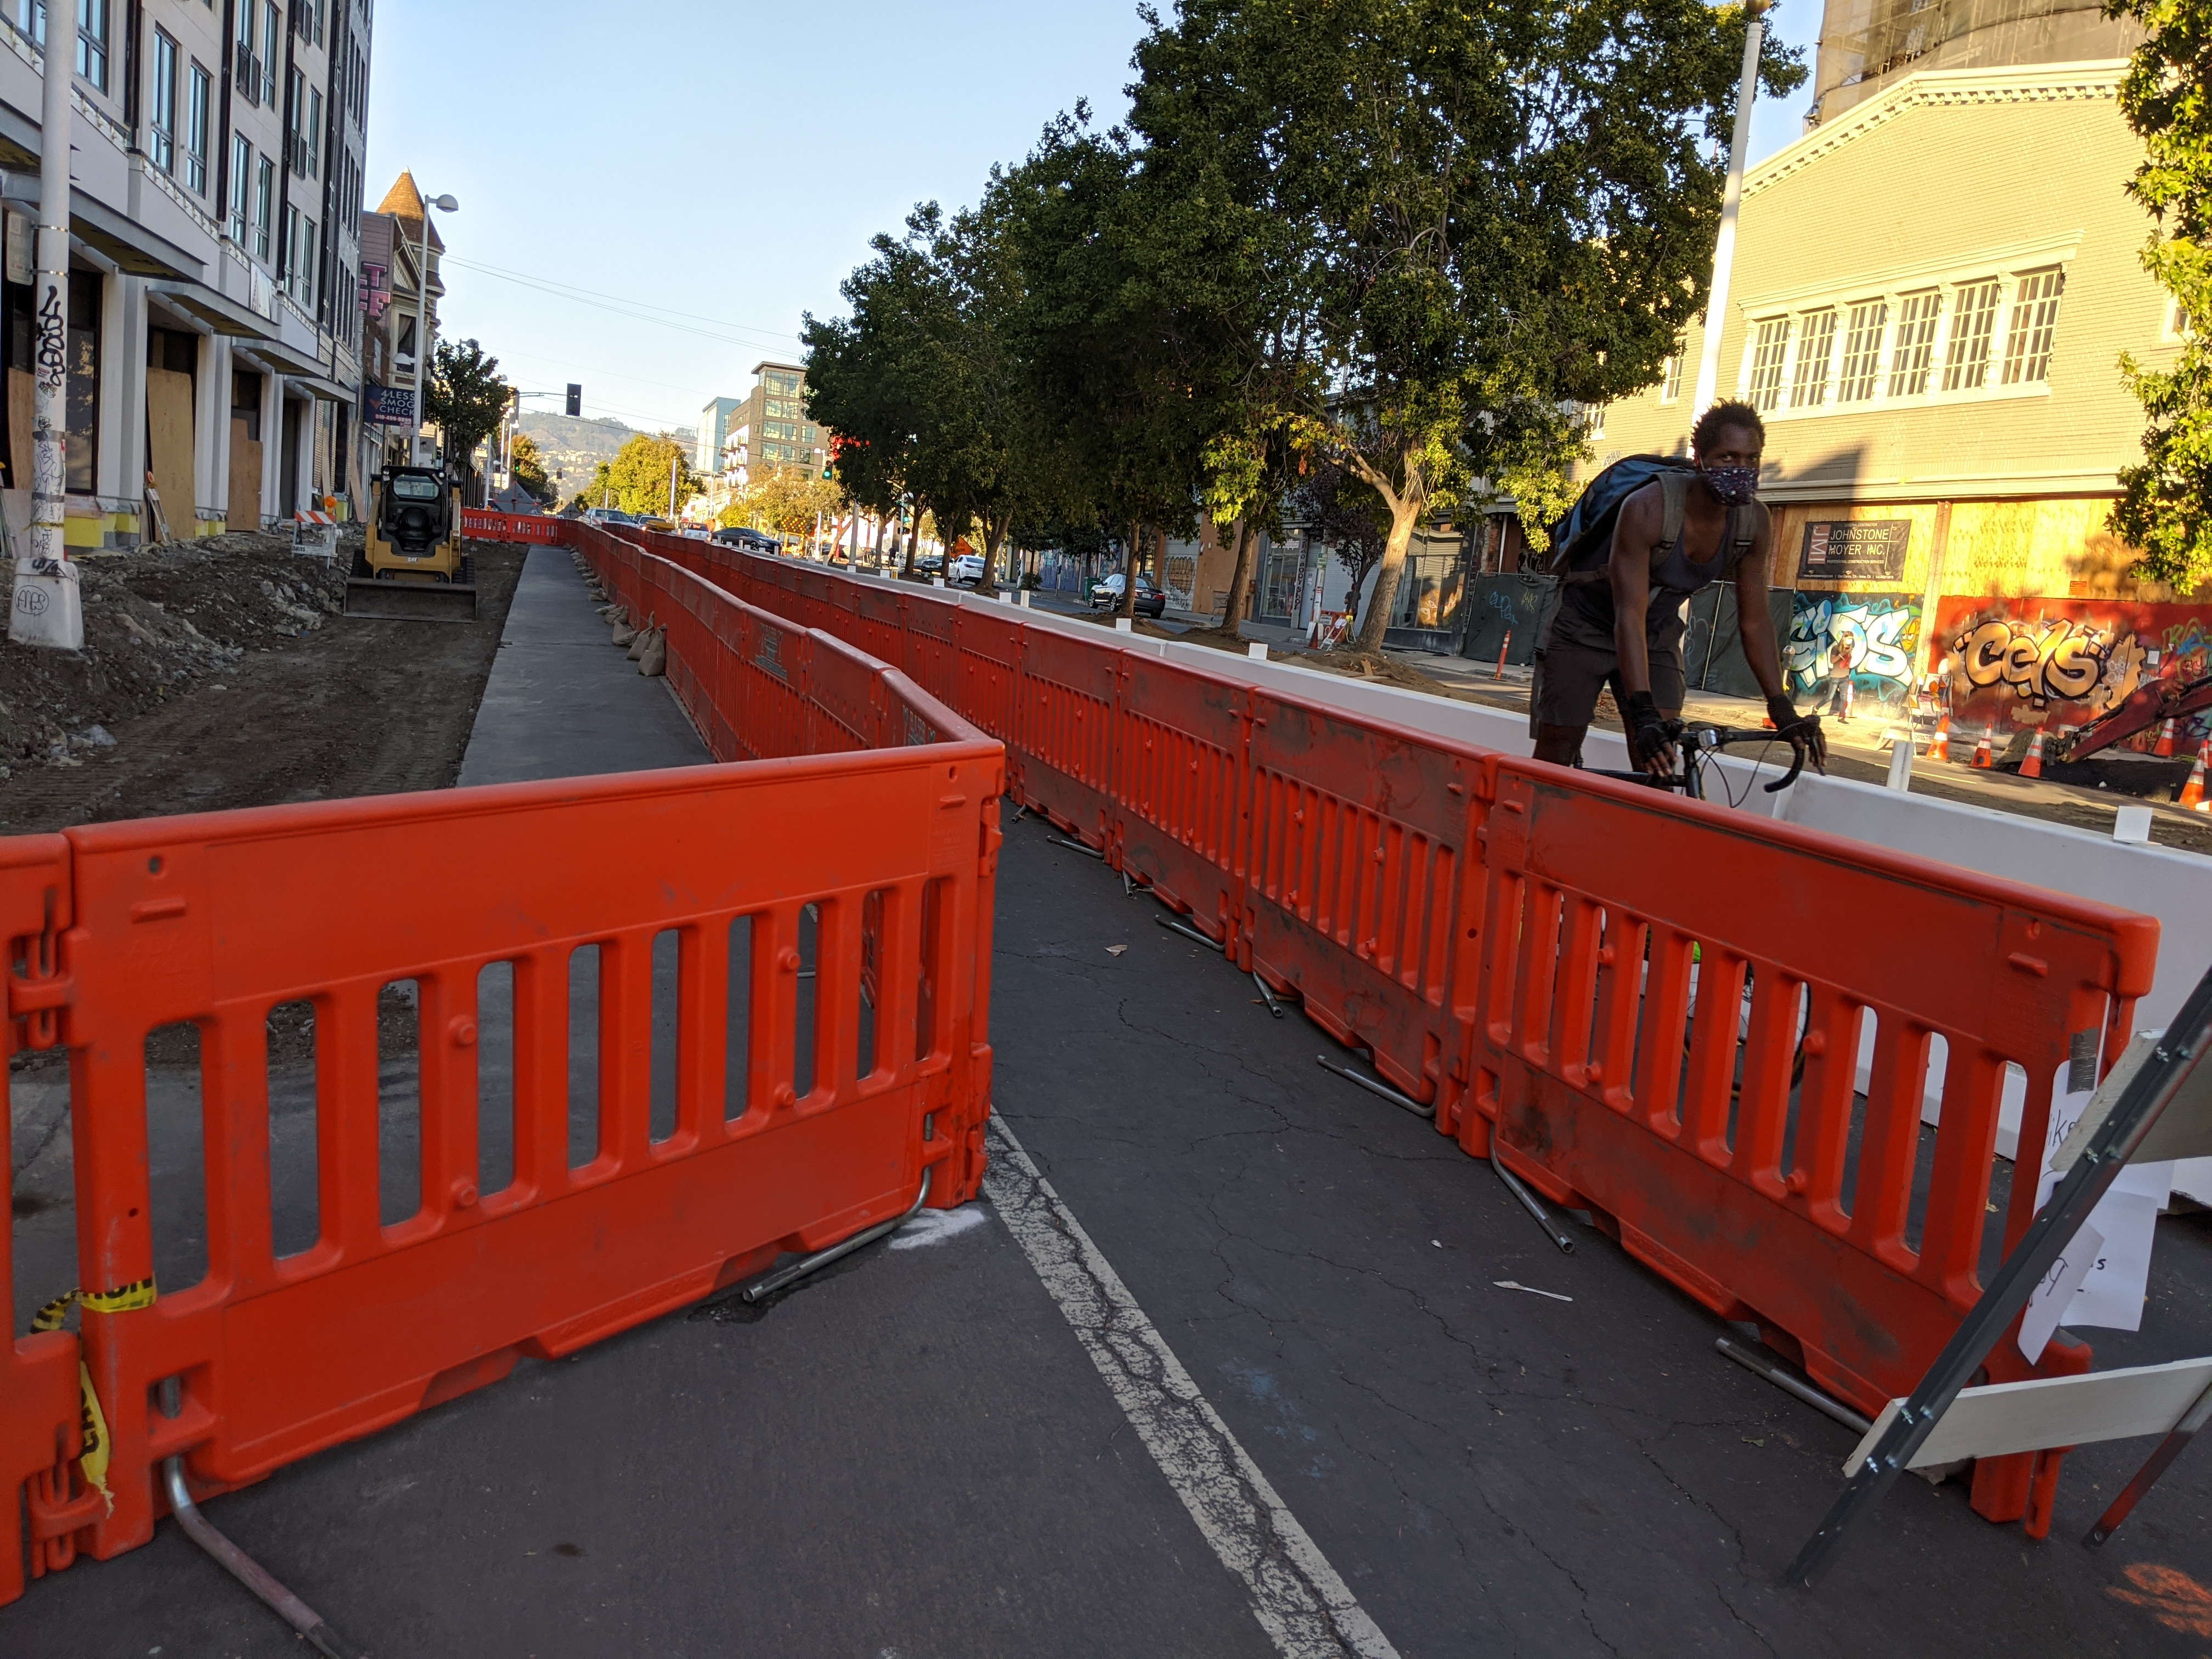 With this configuration, cyclists and pedestrians know exactly where they need to be. And both are protected by an robust barrier from incursions by motorists